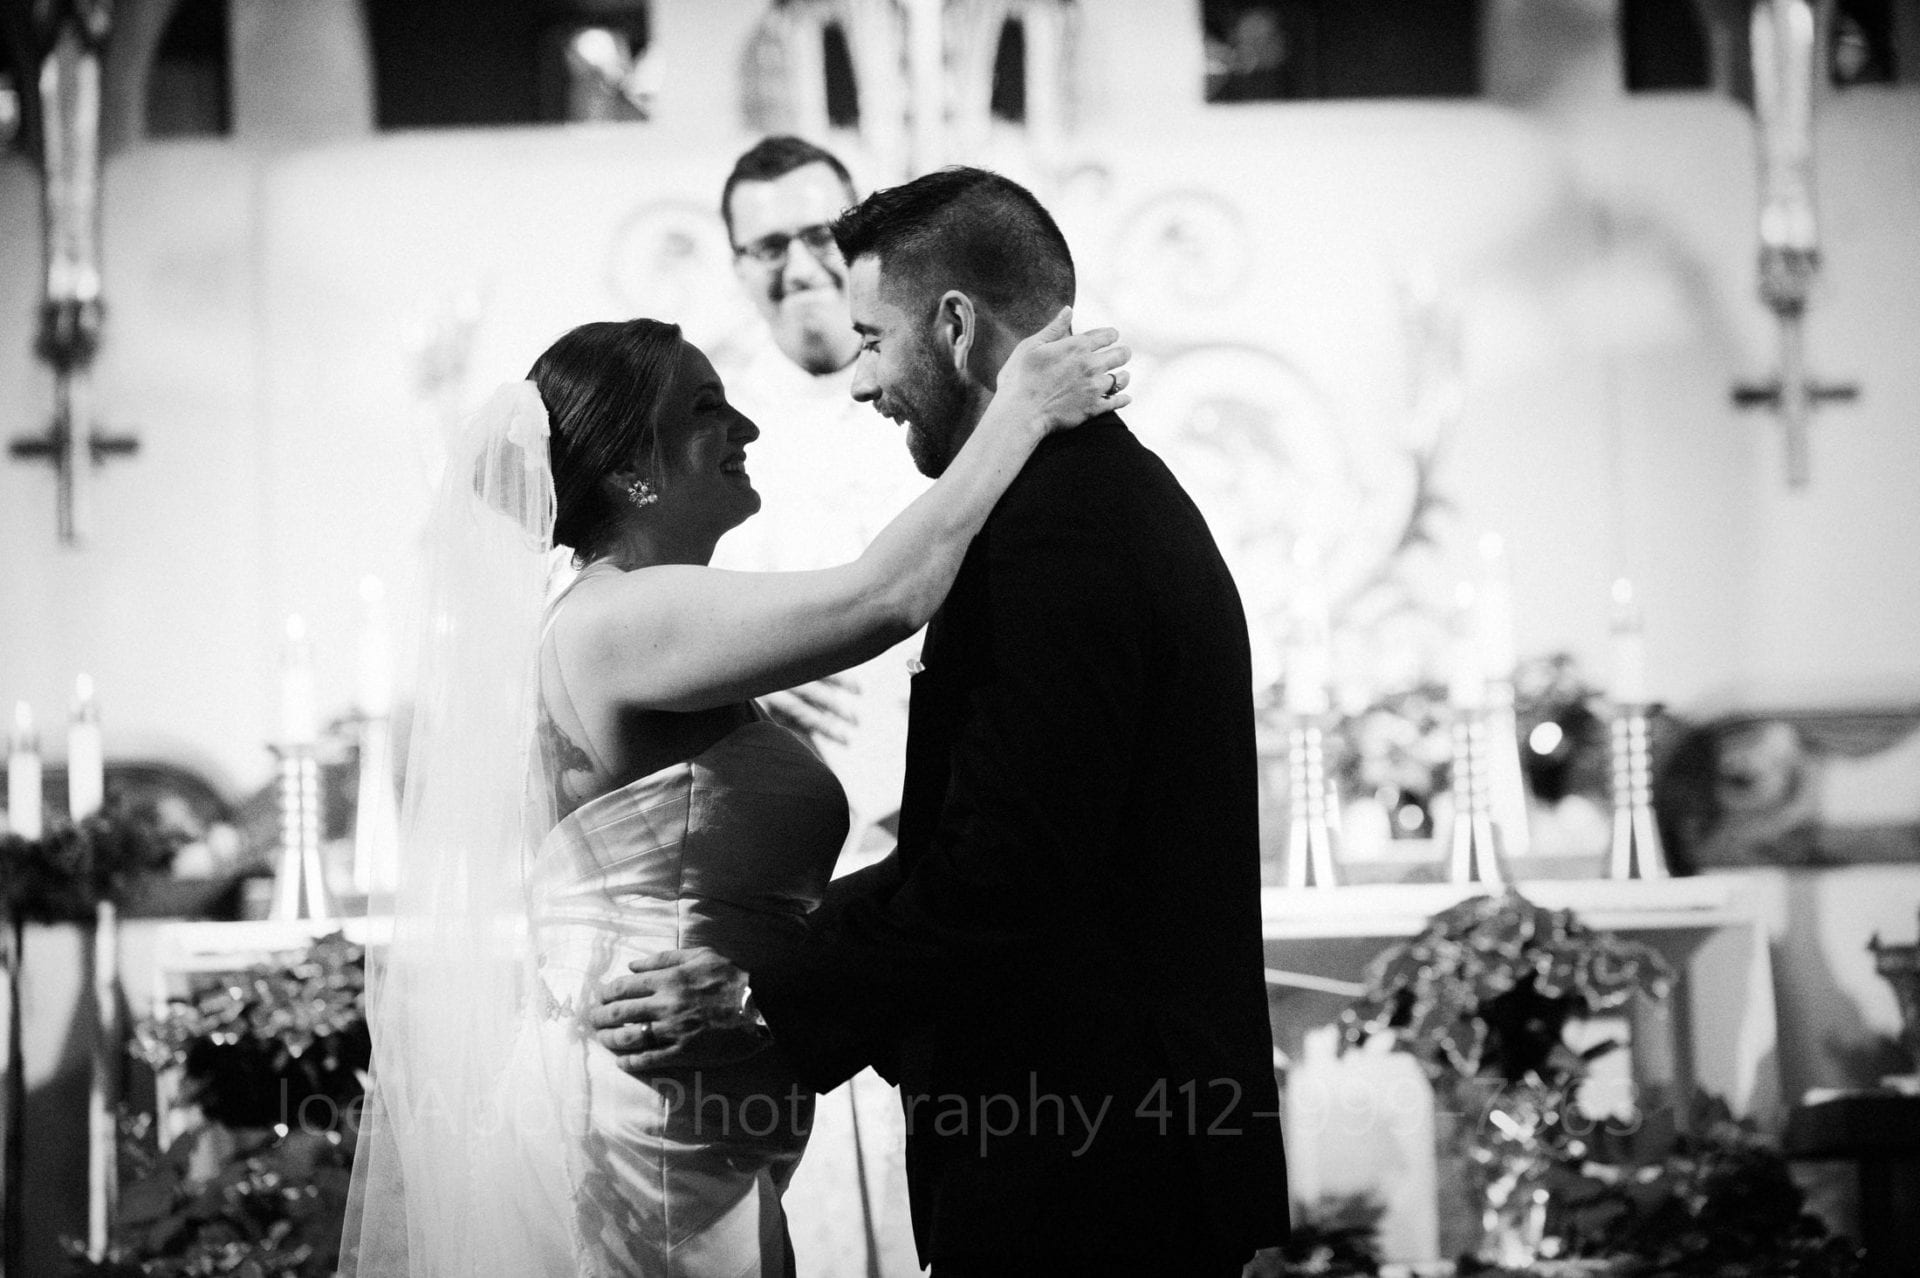 A bride reaches her right arm around the neck of her groom as they move in for a kiss at the end of their wedding ceremony.